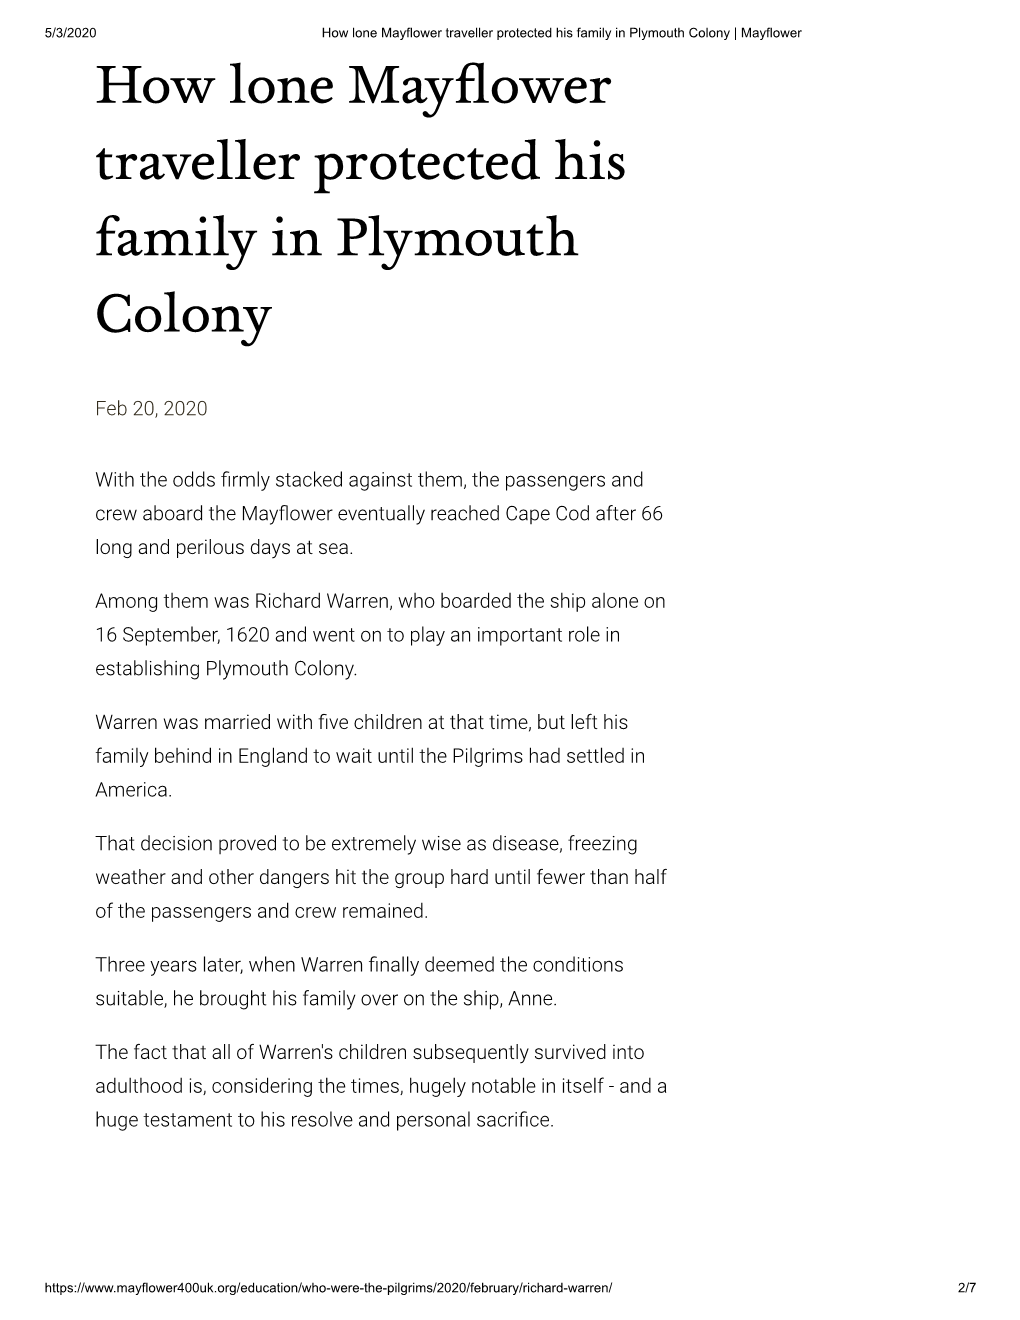 How Lone Mayflower Traveller Protected His Family in Plymouth Colony | Mayflower How Lone Mayﬂower Traveller Protected His Family in Plymouth Colony